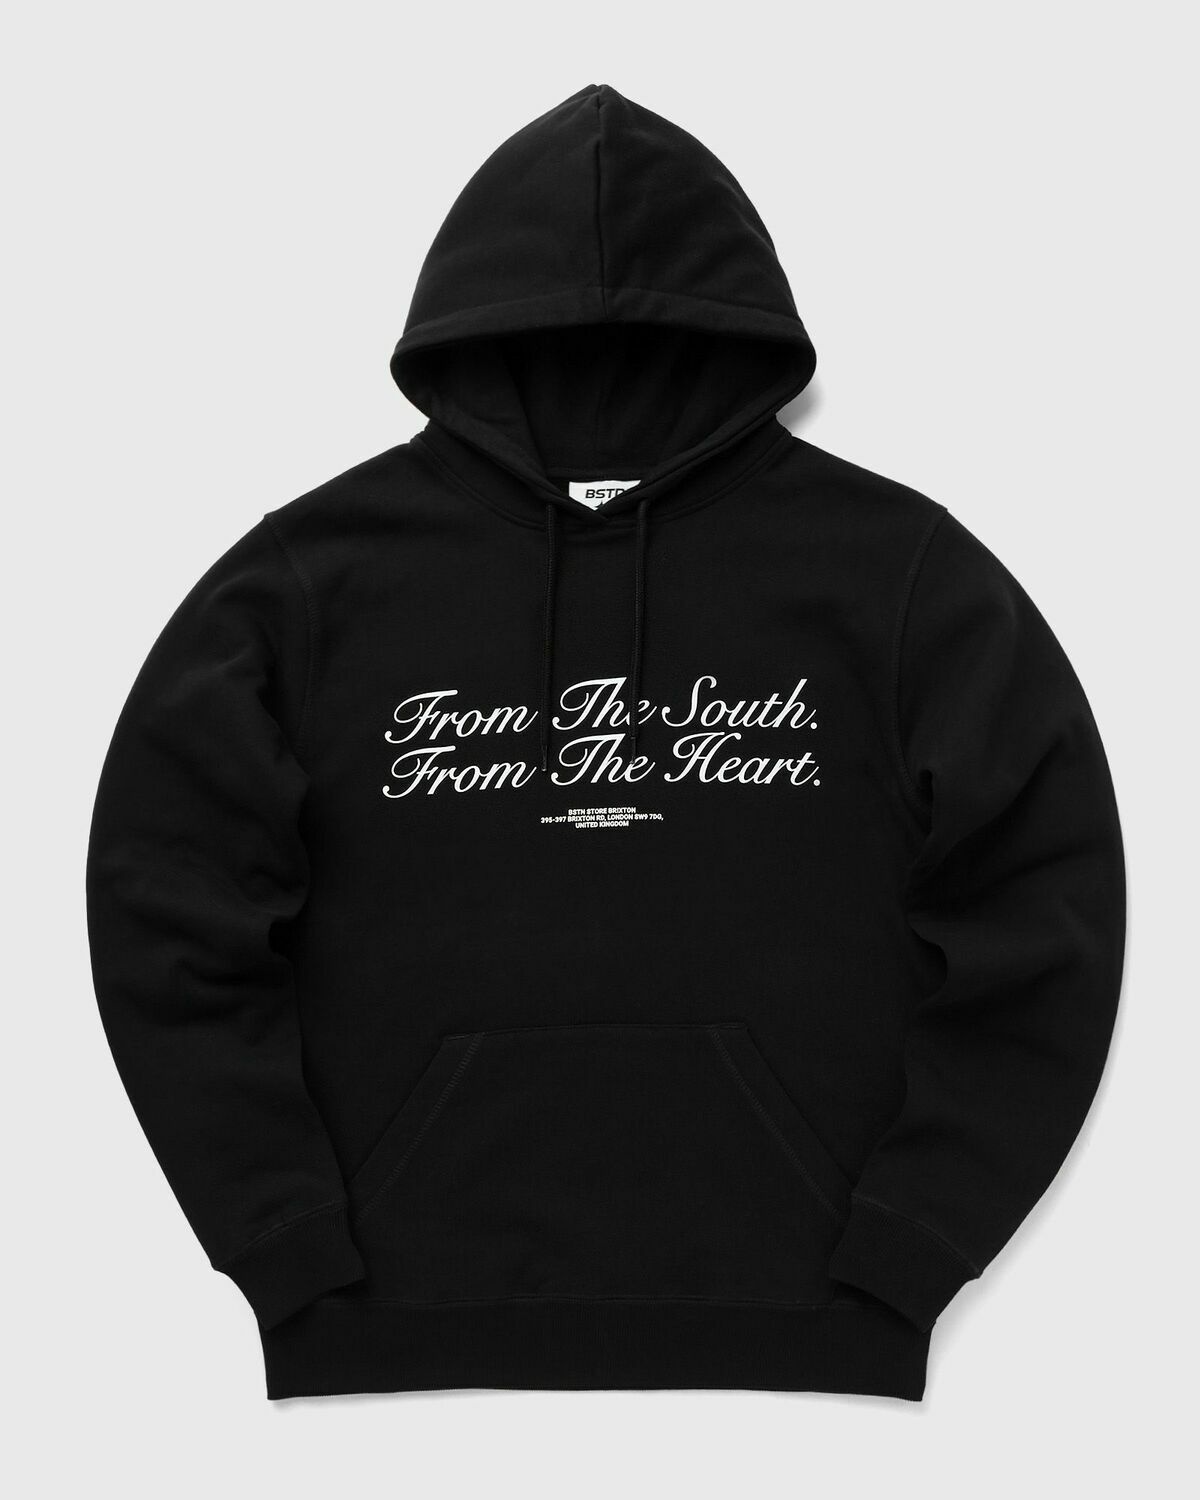 Bstn Brand From The South From The Heart Hoody Black - Mens - Hoodies